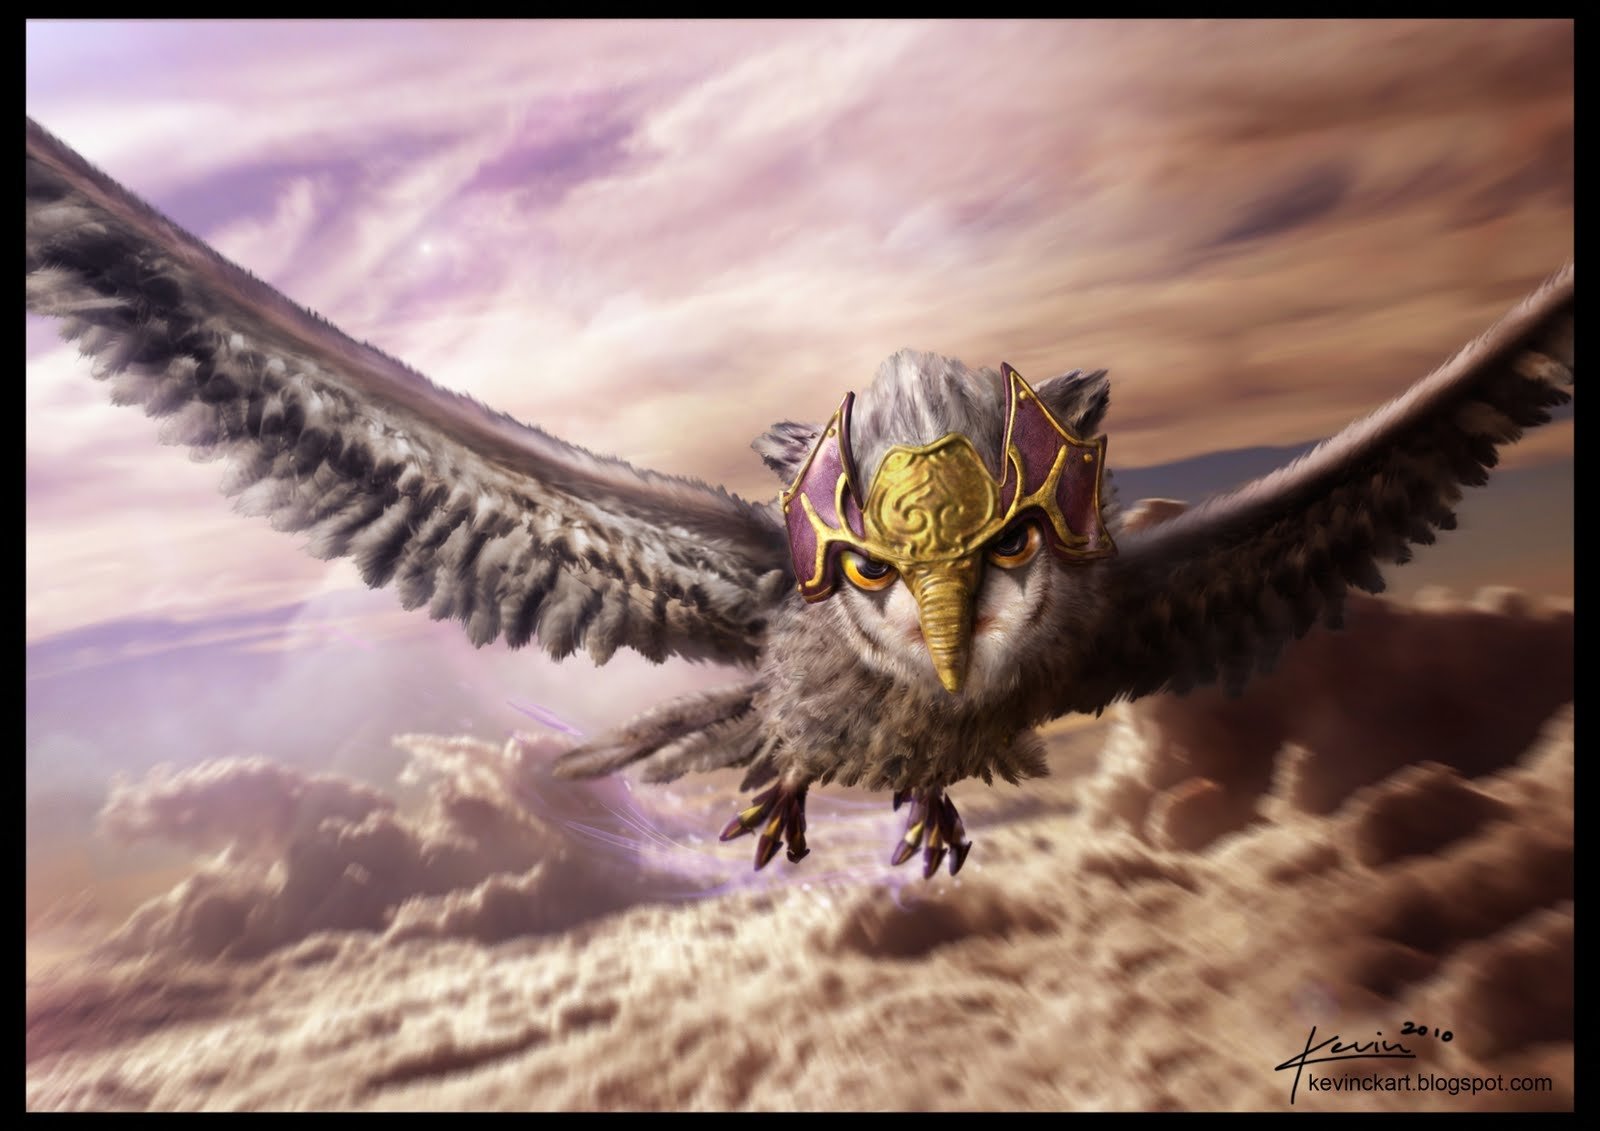 Legend Of The Guardians: The Owls Of Ga'Hoole Wallpapers